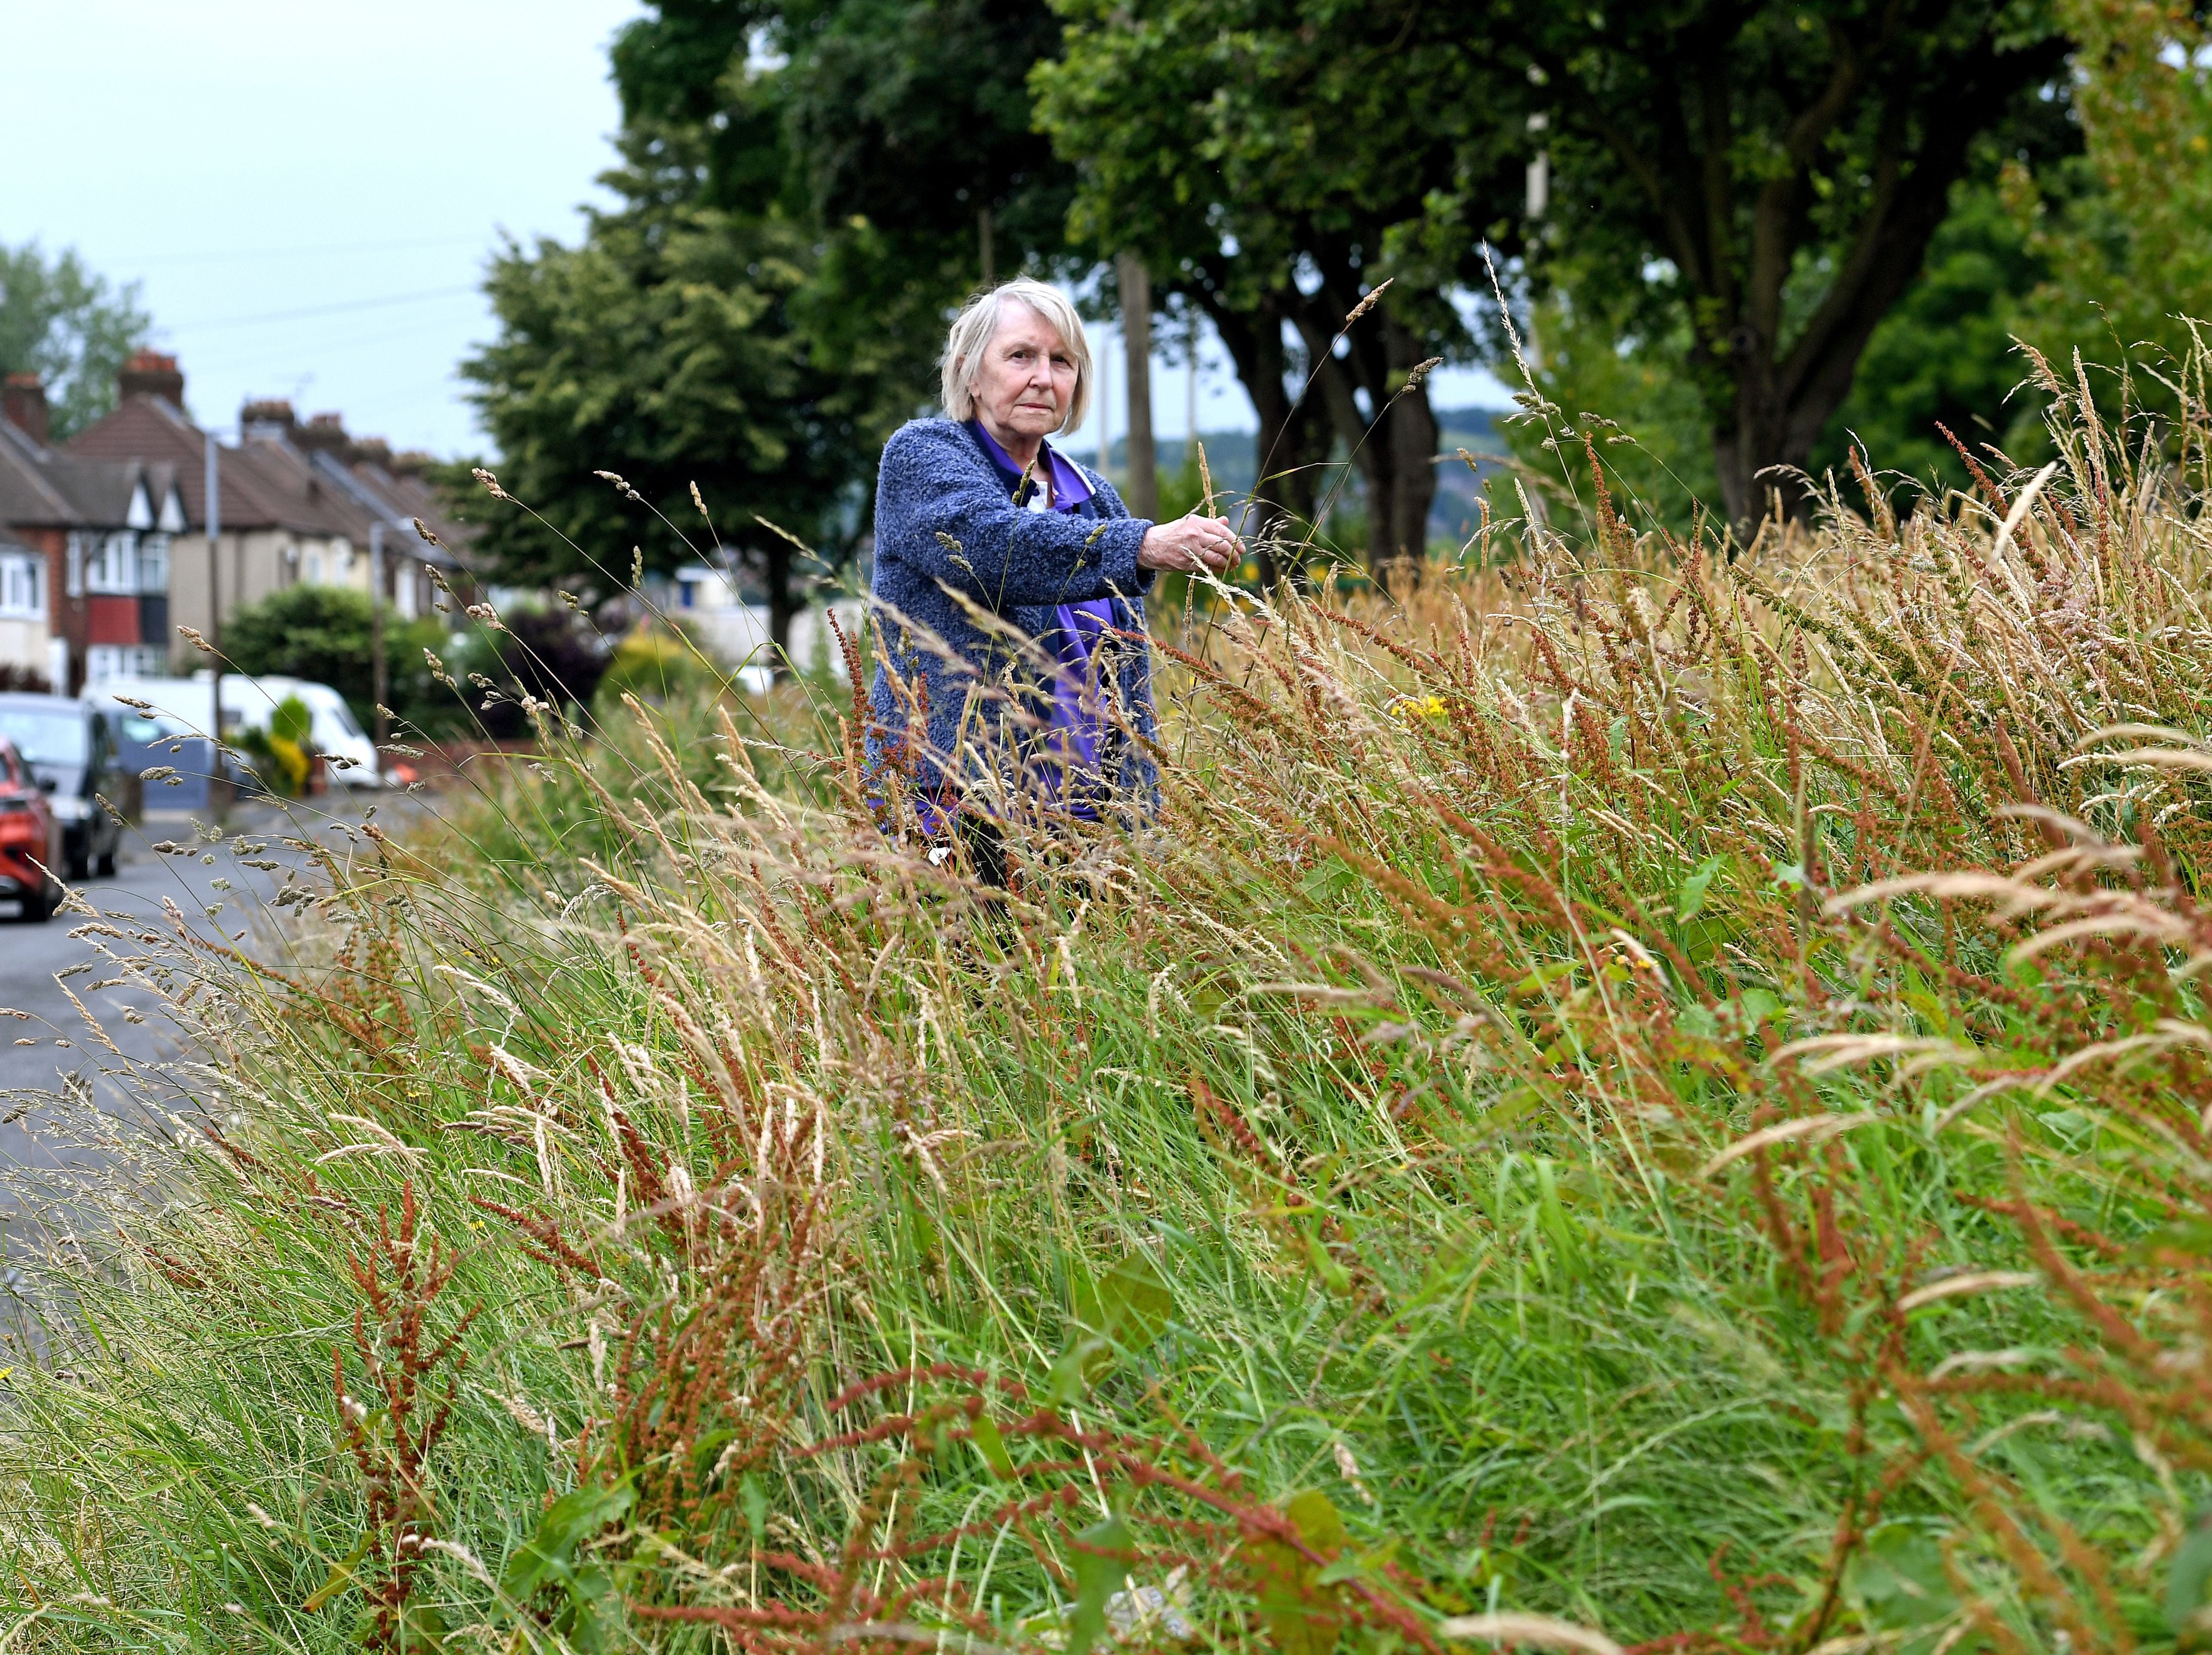 'It used to be beautifully maintained - now it's the forgotten land': Dismay at state of grass bank